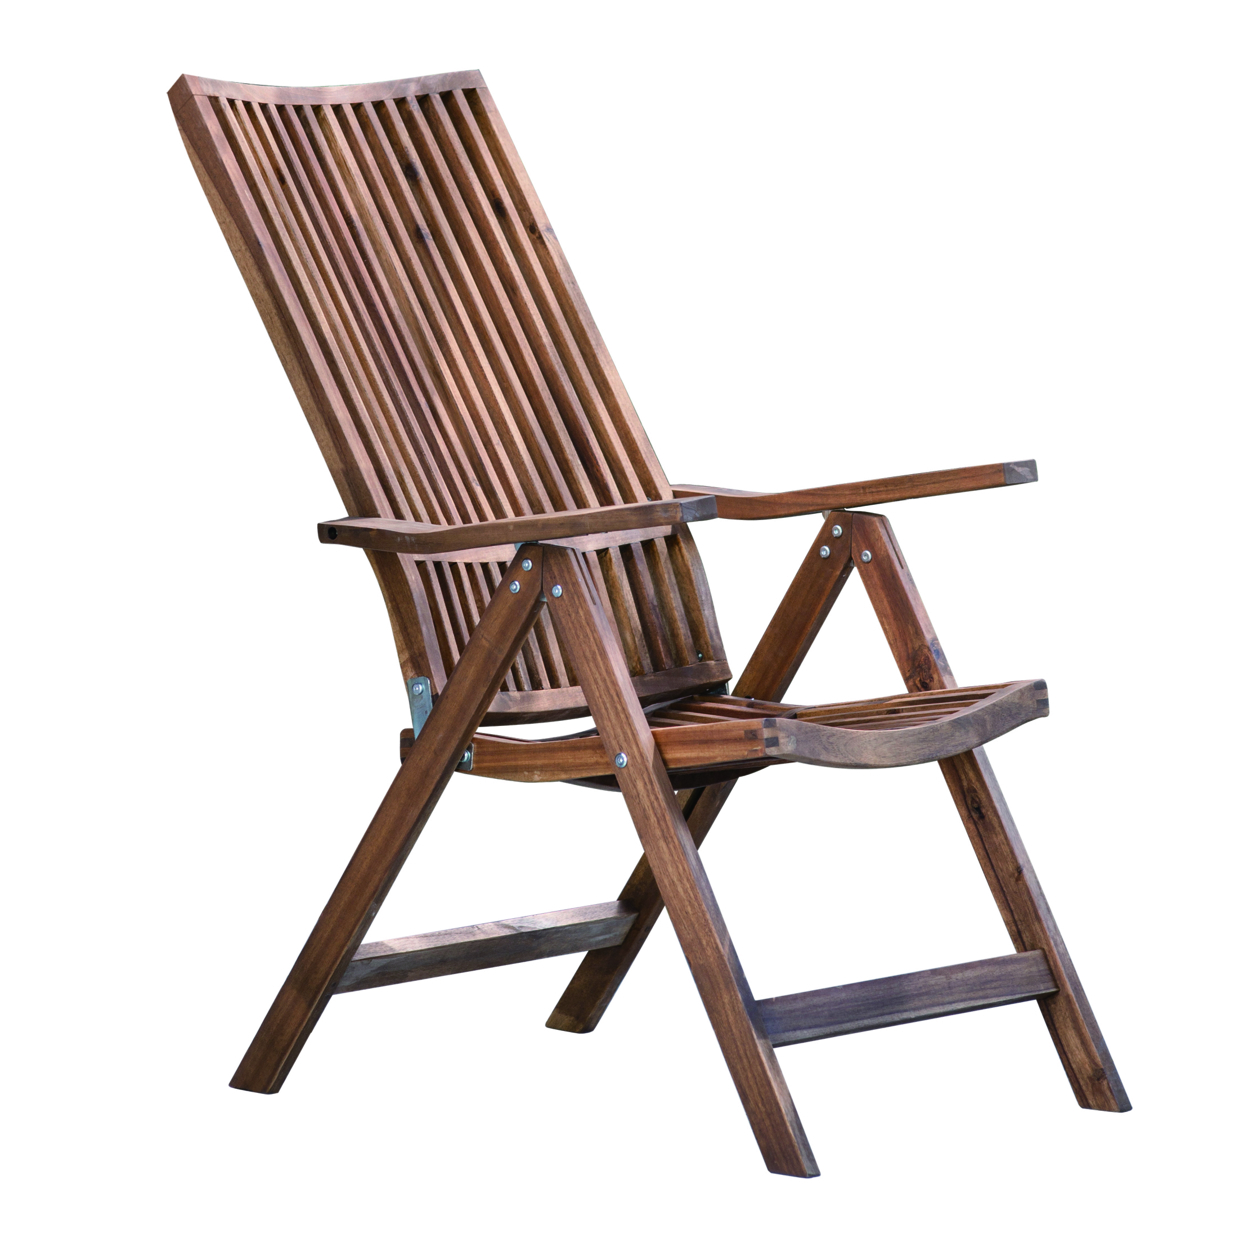 Rustic Wooden Adjustable Lounge Chair With Slatted Design, Brown- Saltoro Sherpi